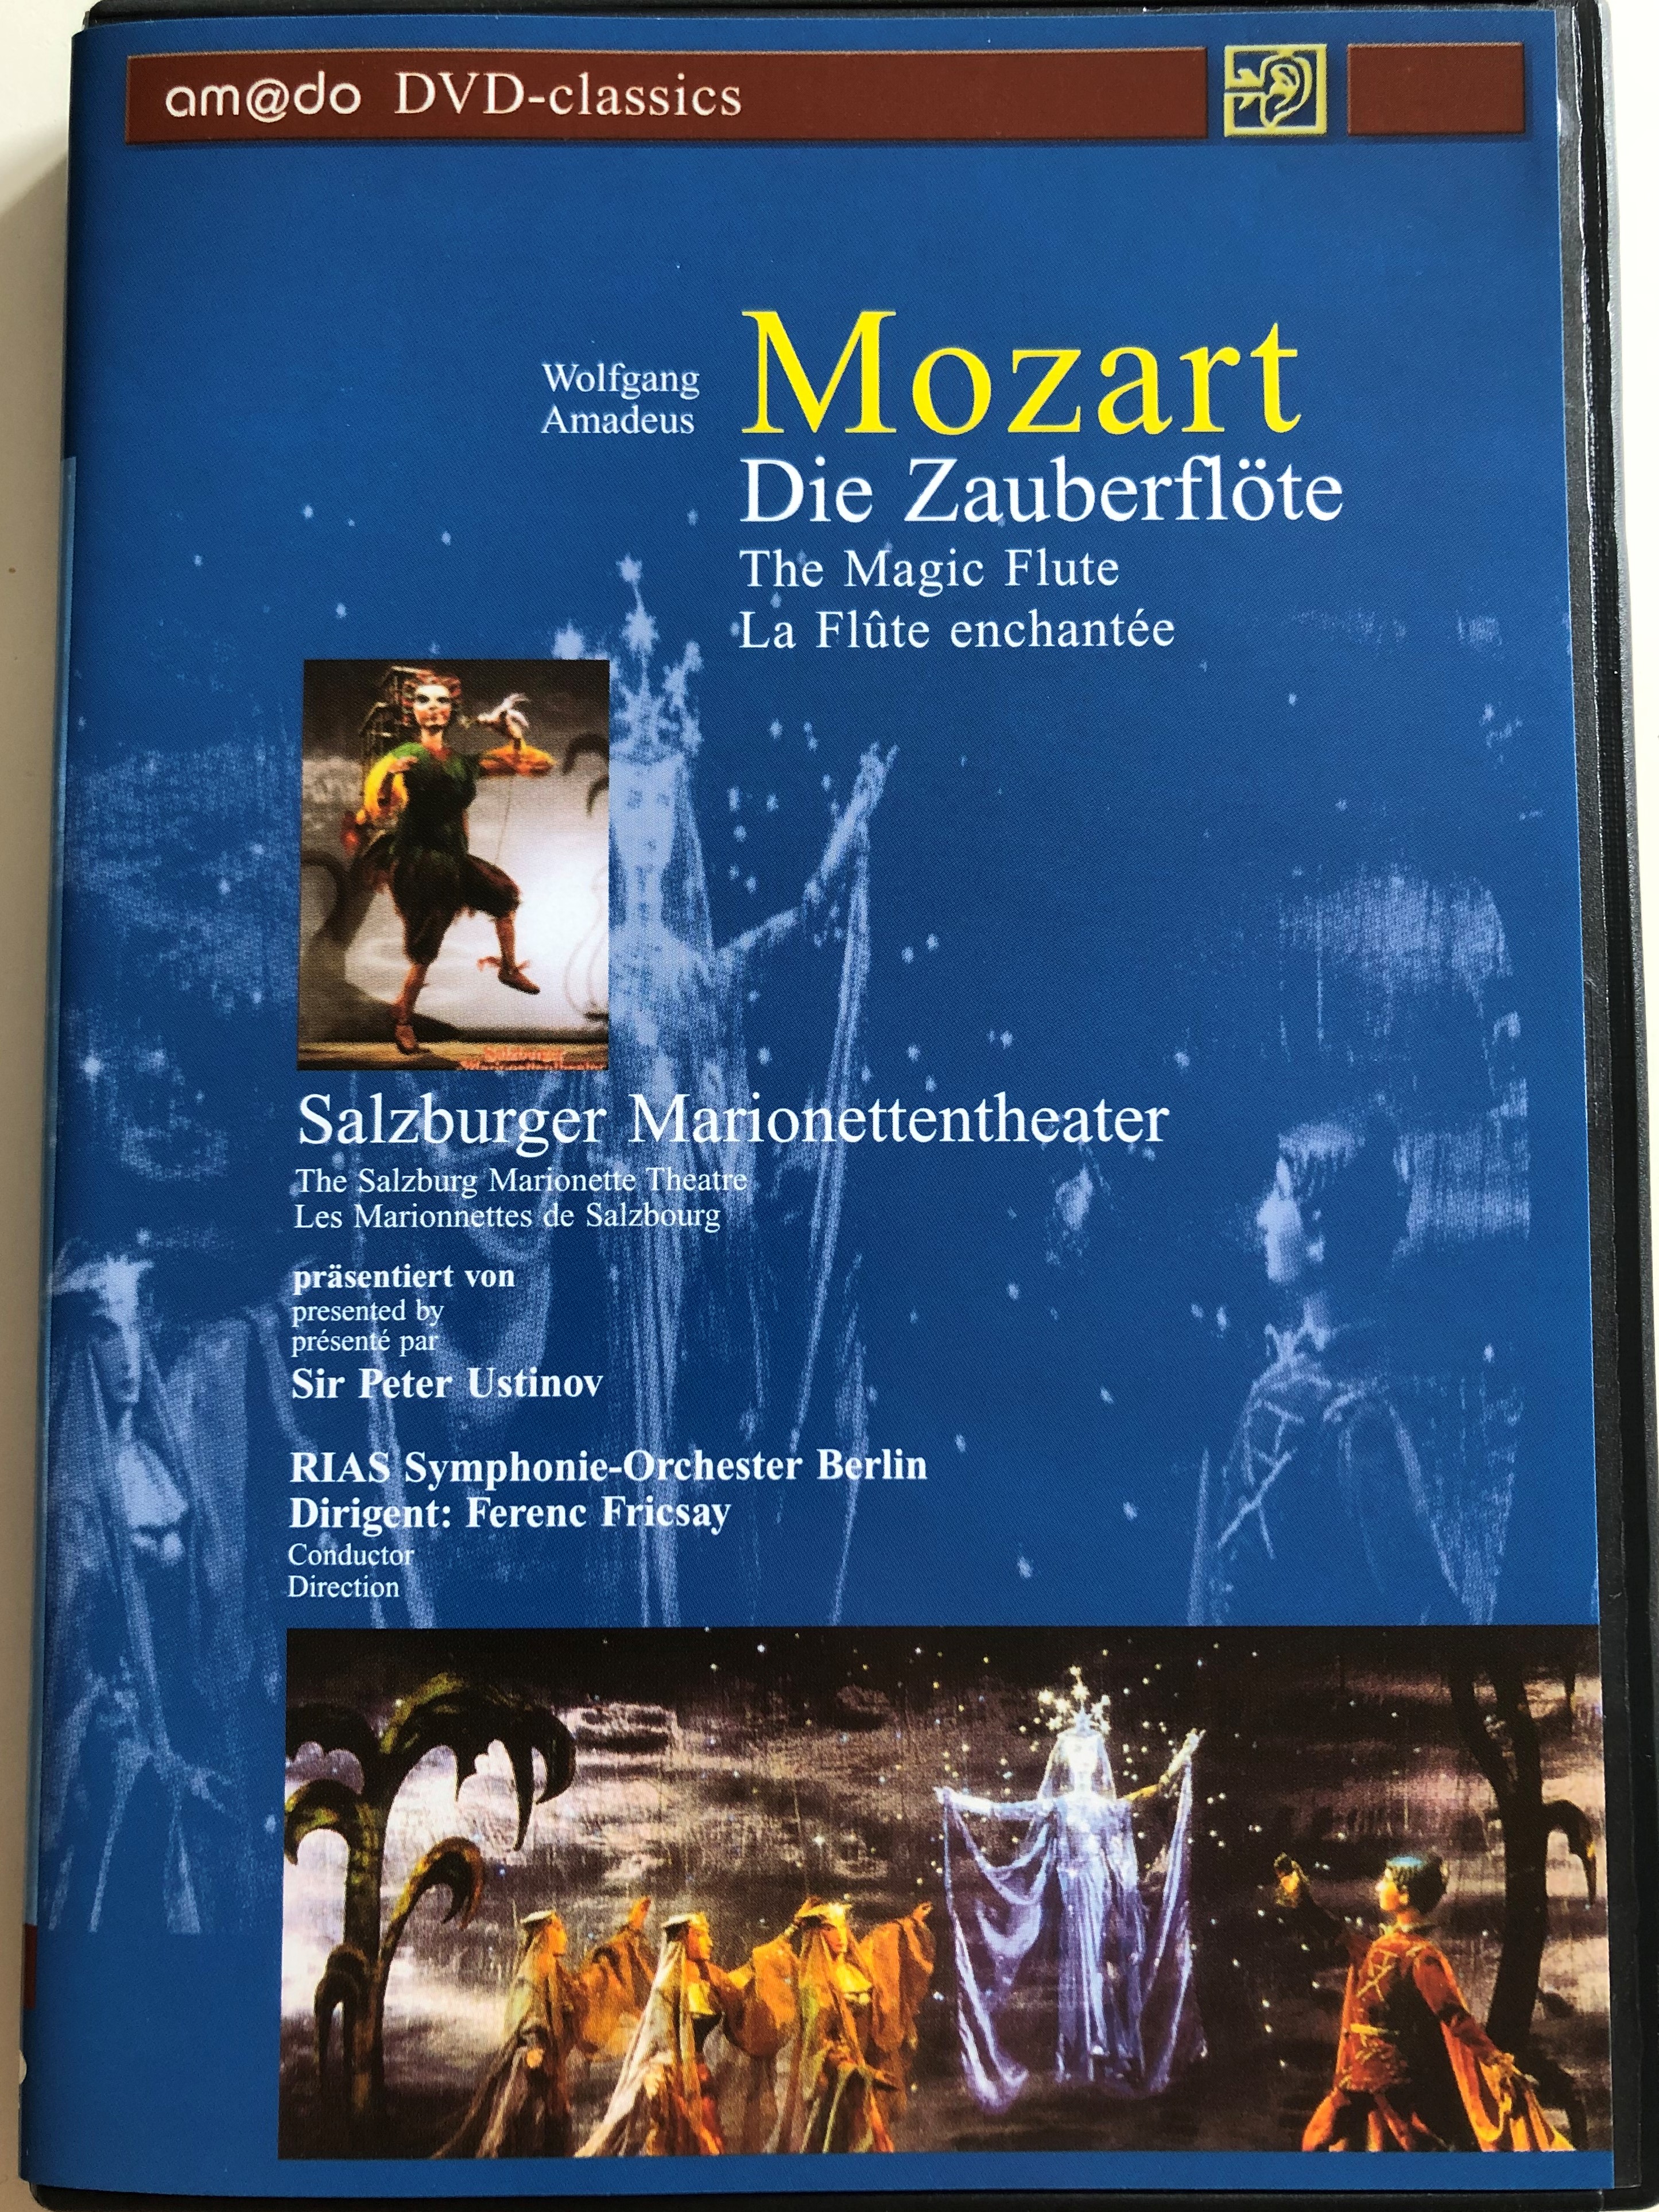 w.a.-mozart-die-zauberfl-te-dvd-2001-the-magic-flute-directed-by-georg-w-bbolt-text-and-narration-by-sir-peter-ustinov-the-salzburg-marionette-theatre-rias-berlin-symphony-orchestra-conducted-by-ferenc-fricsay-1-.jpg